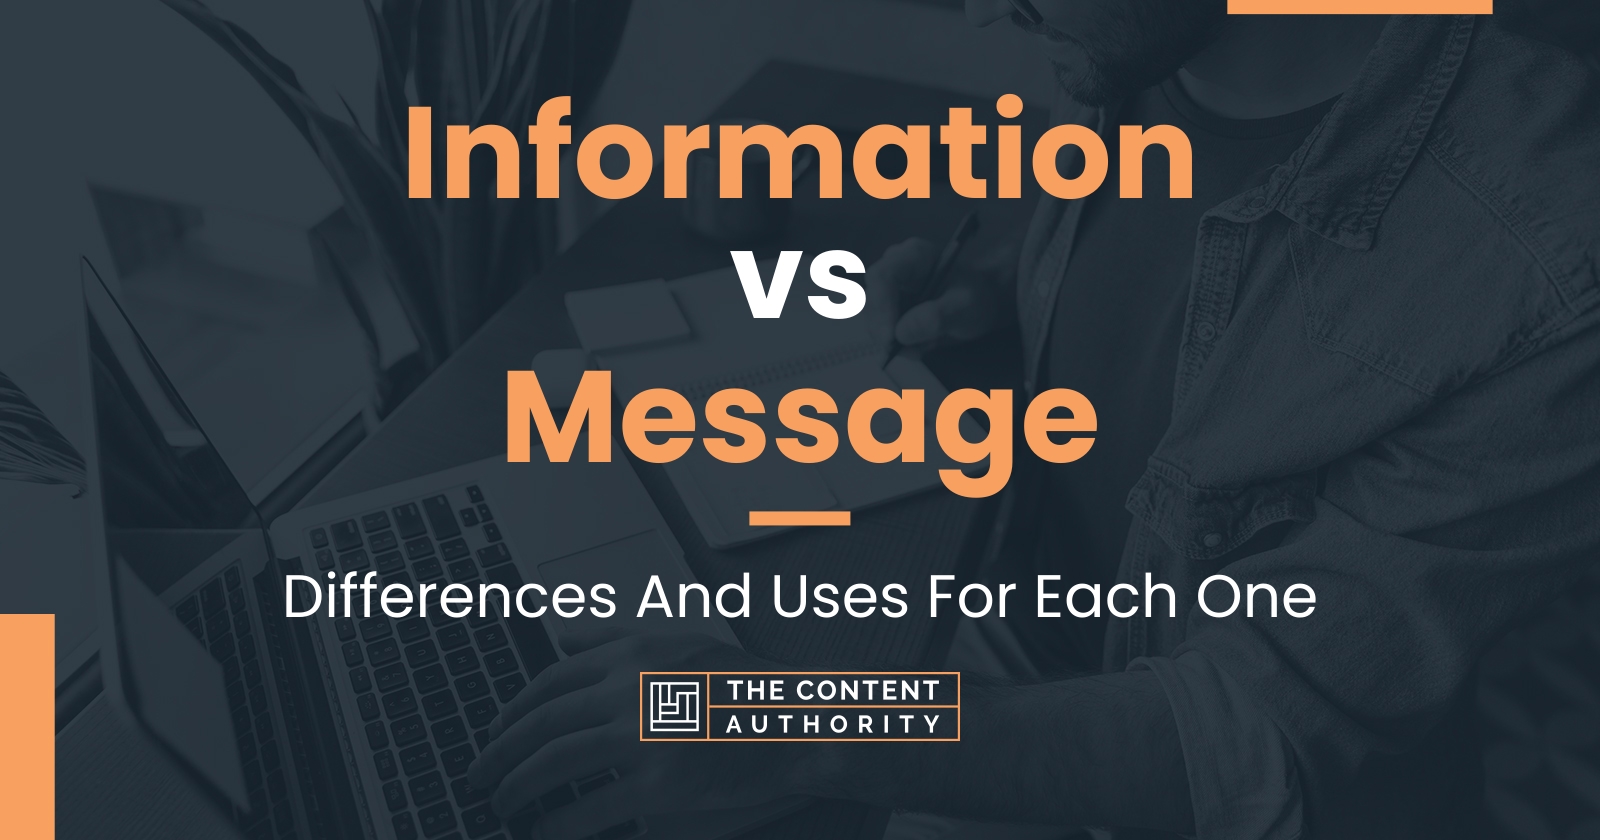 Information vs Message: Differences And Uses For Each One